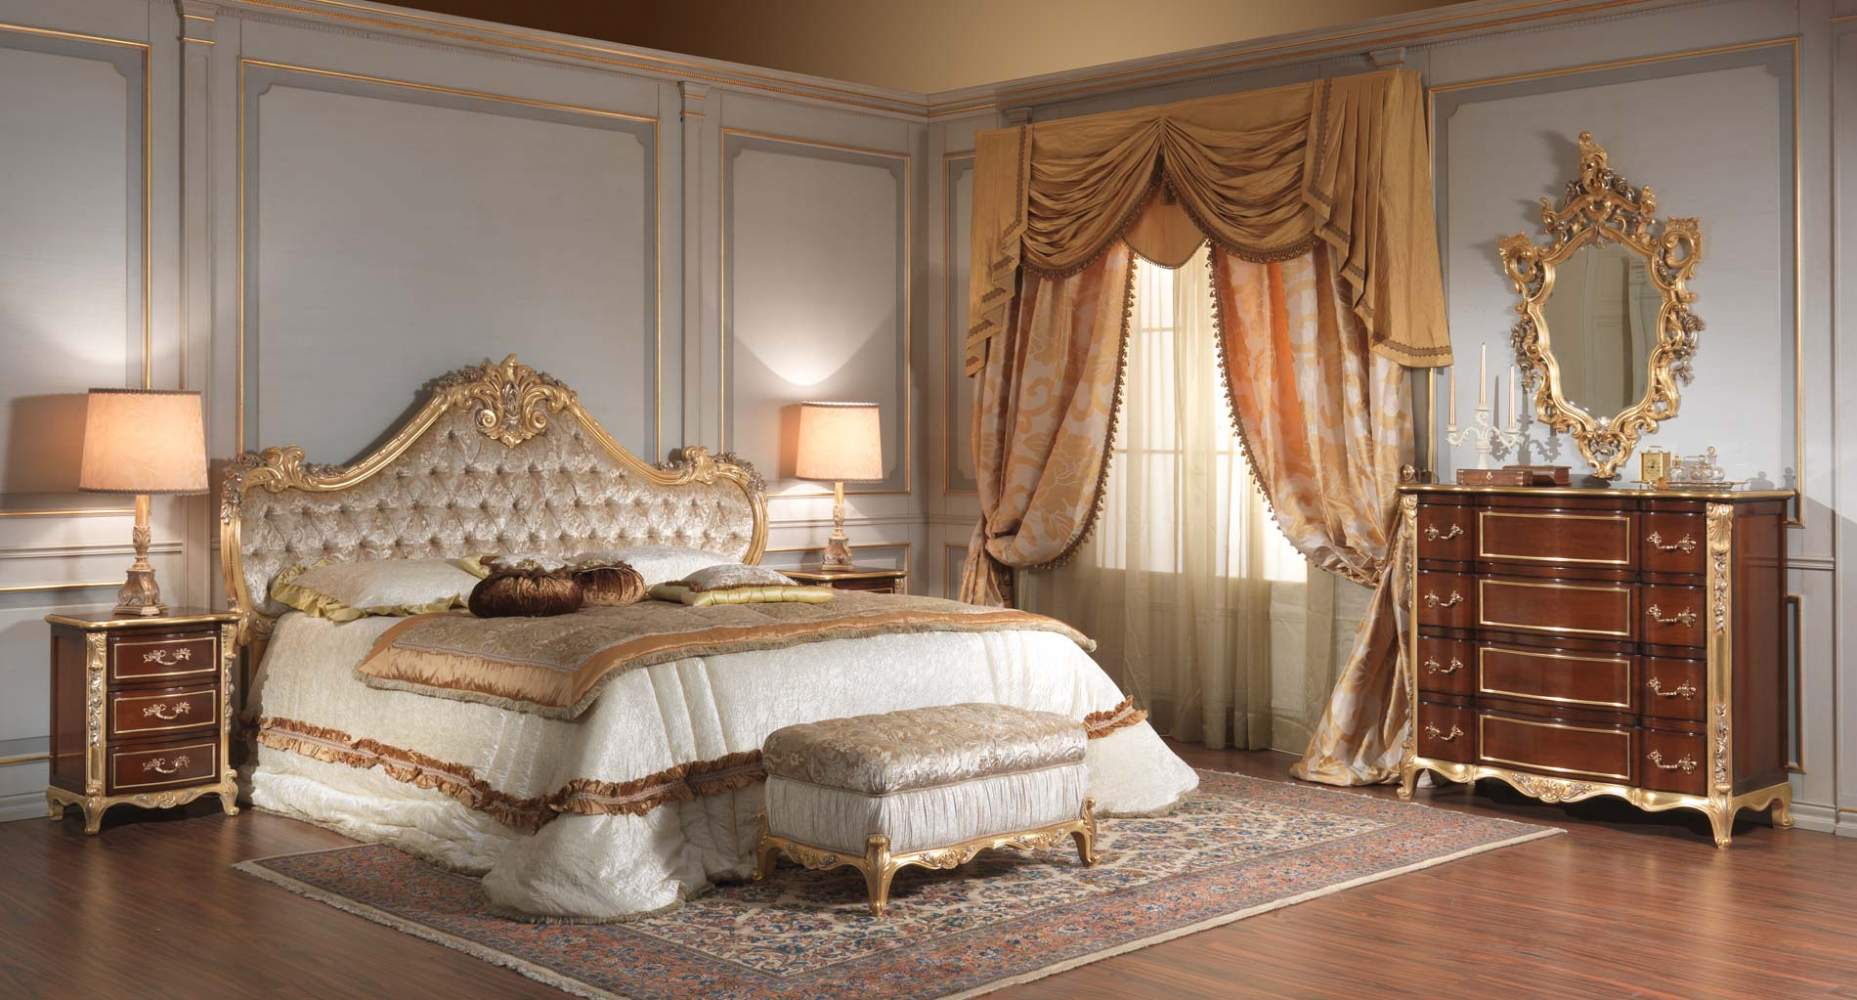 Top 5 Things To Know About Top Quality Bedroom Furniture